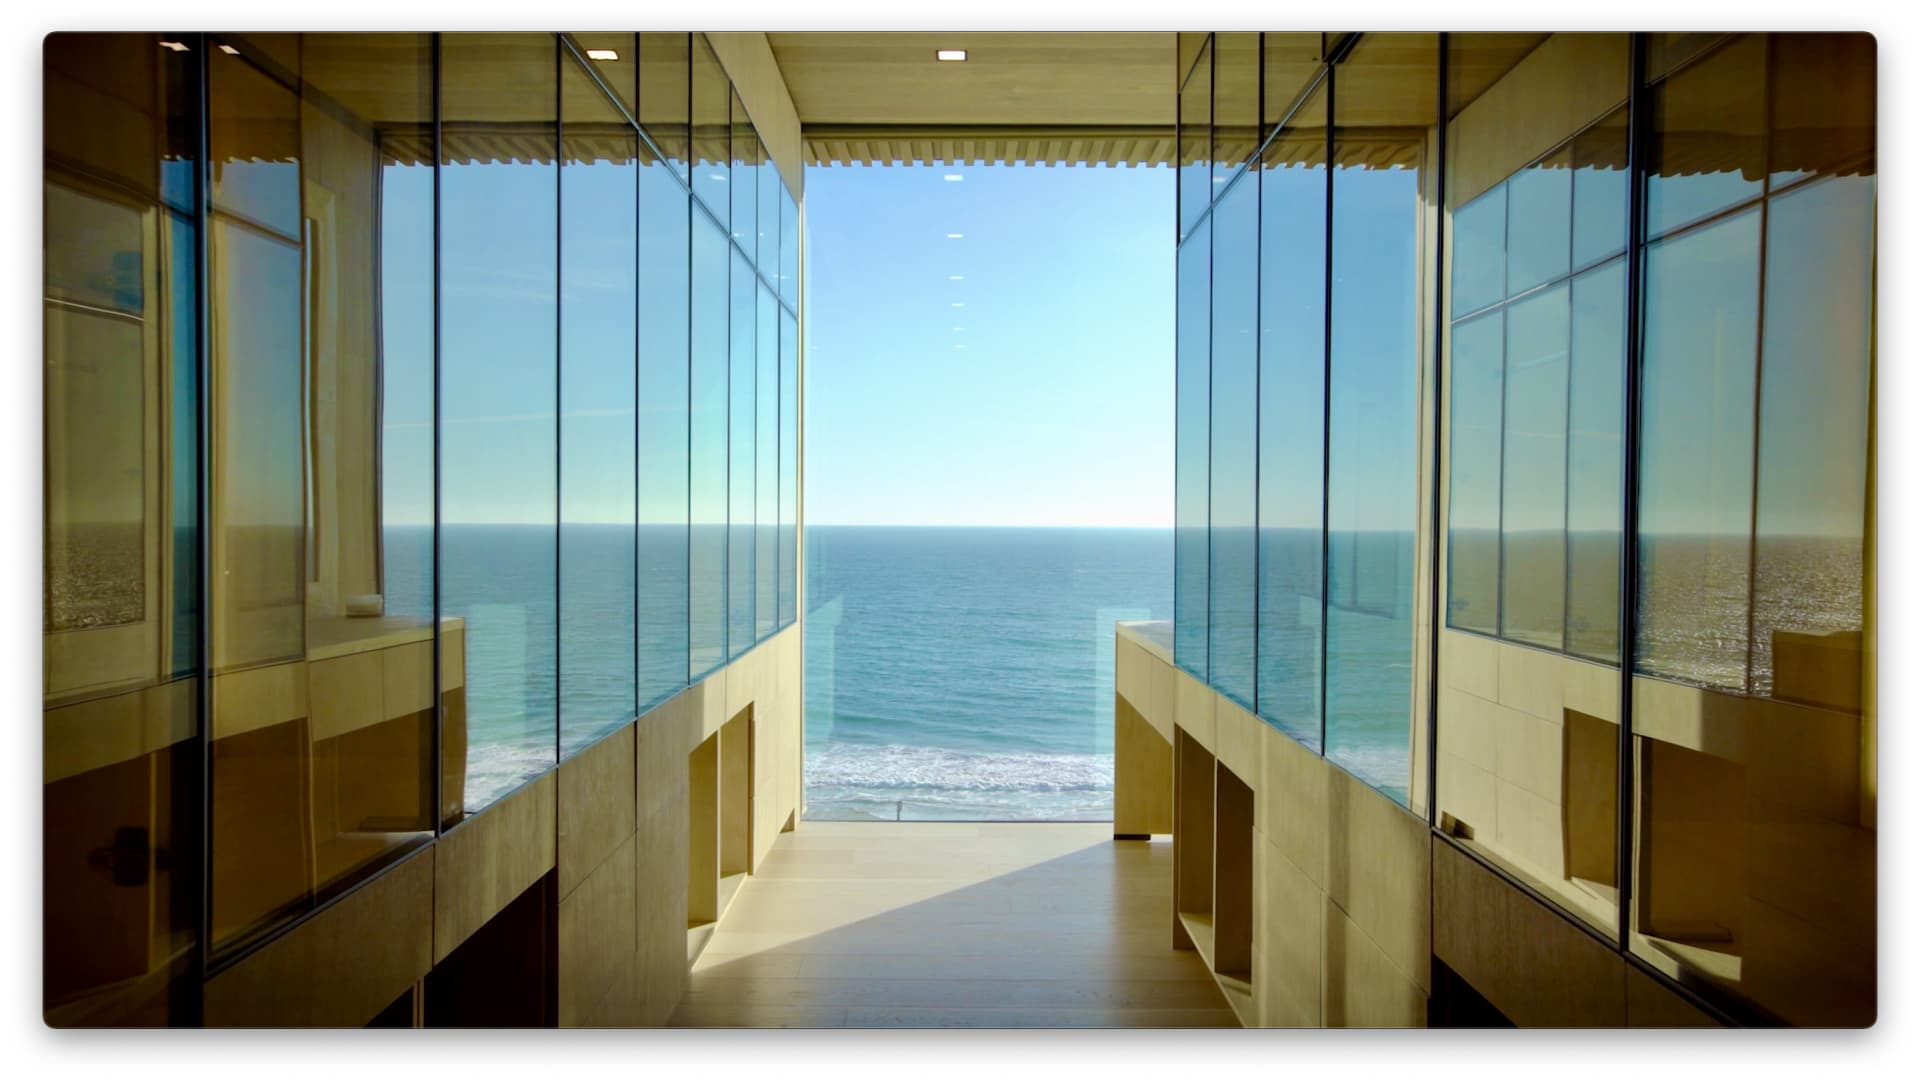 The primary suite's walk-in closets include a floor-to-ceiling window with impressive views of the ocean.